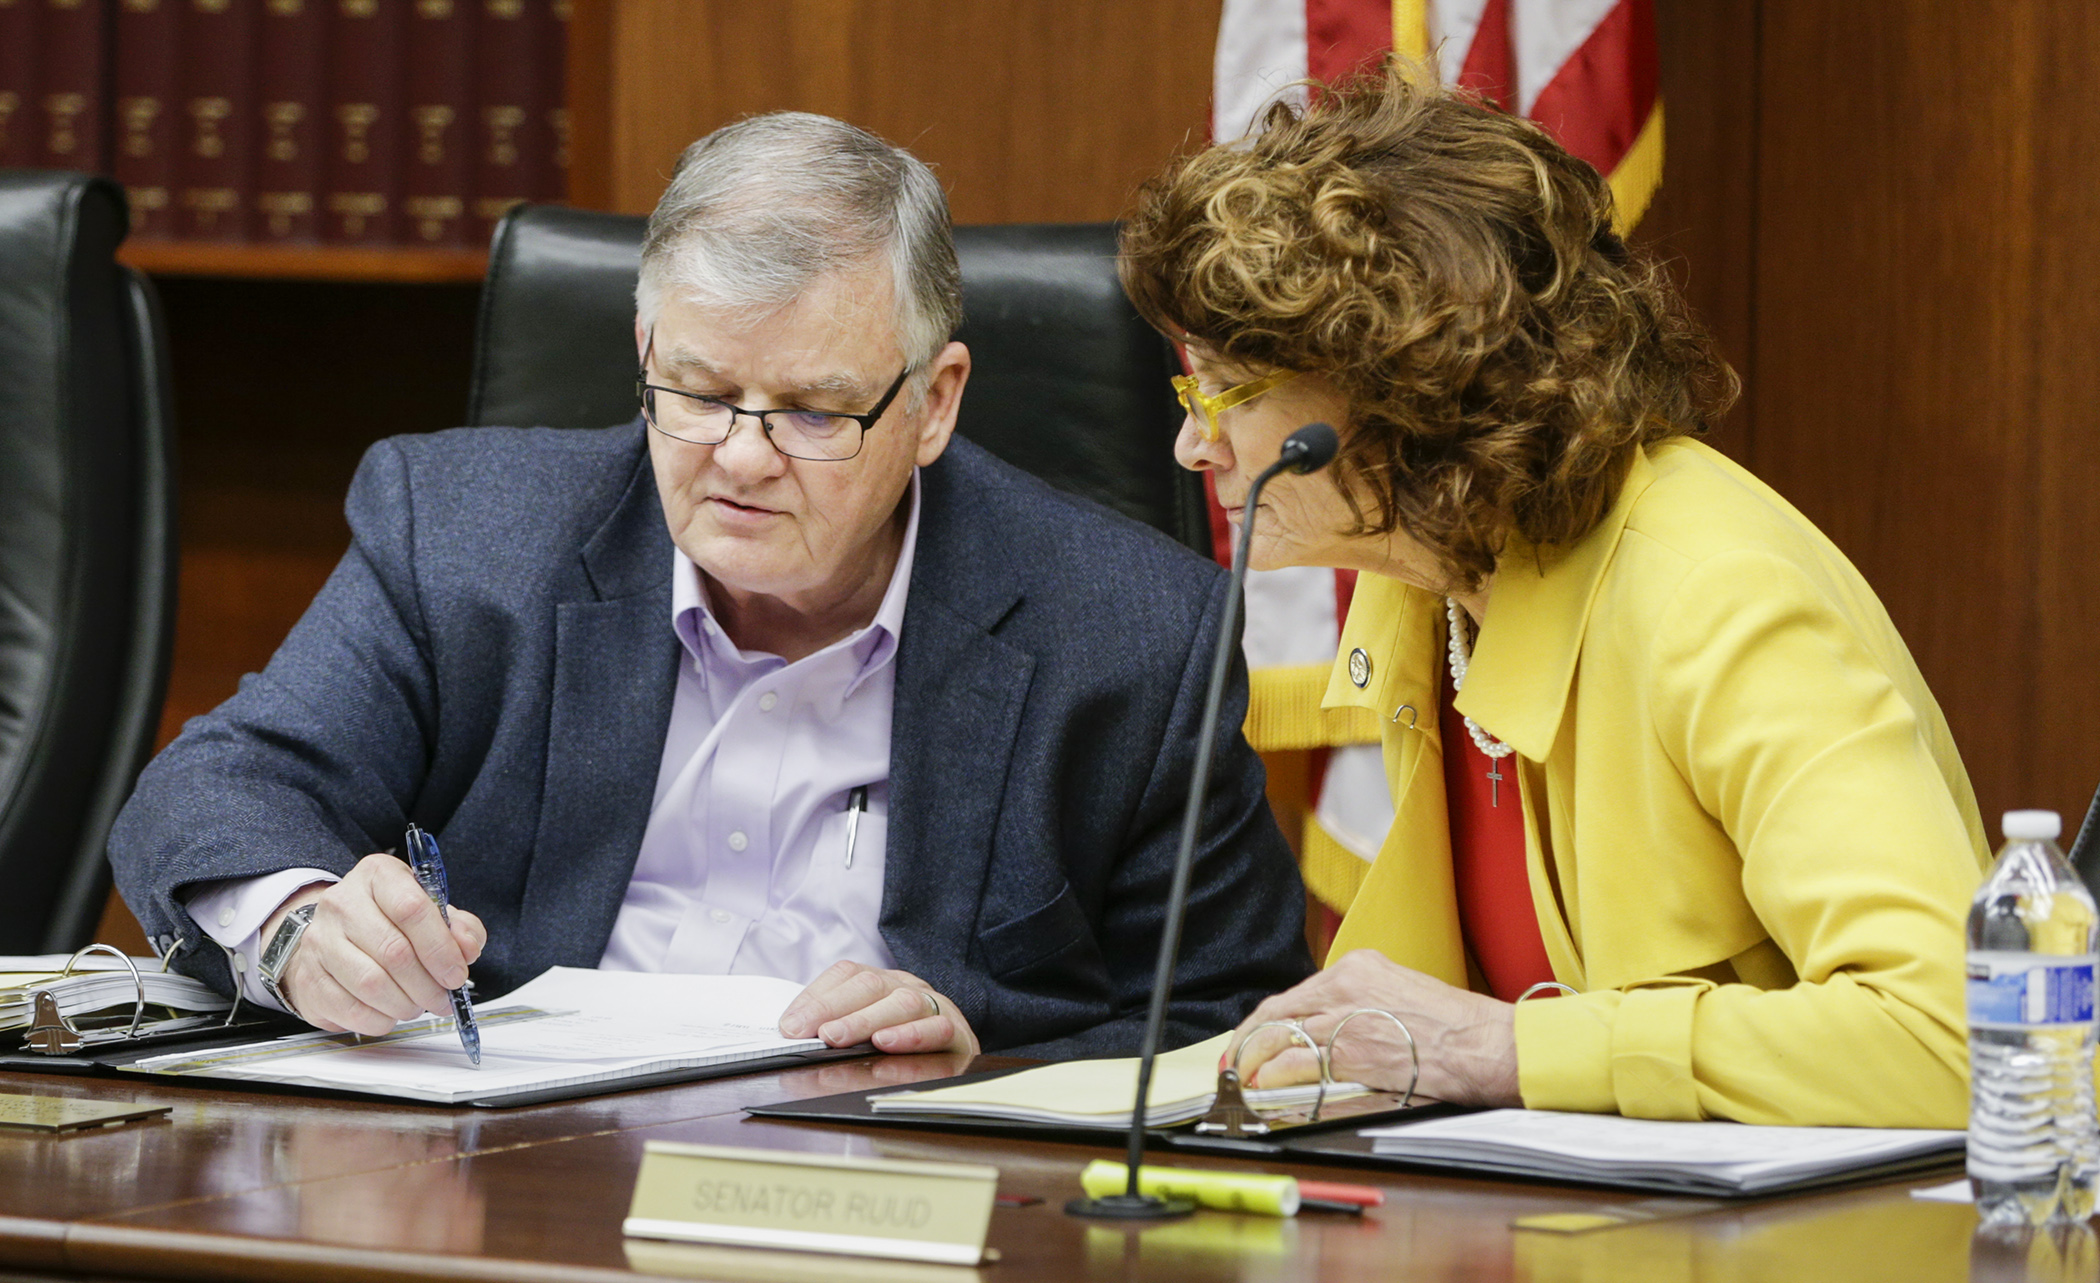 Rep. Bob Gunther and Sen. Carrie Ruud, co-chairs of the omnibus legacy conference committee, confer April 27 before the start of the first meeting. Photo by Paul Battaglia